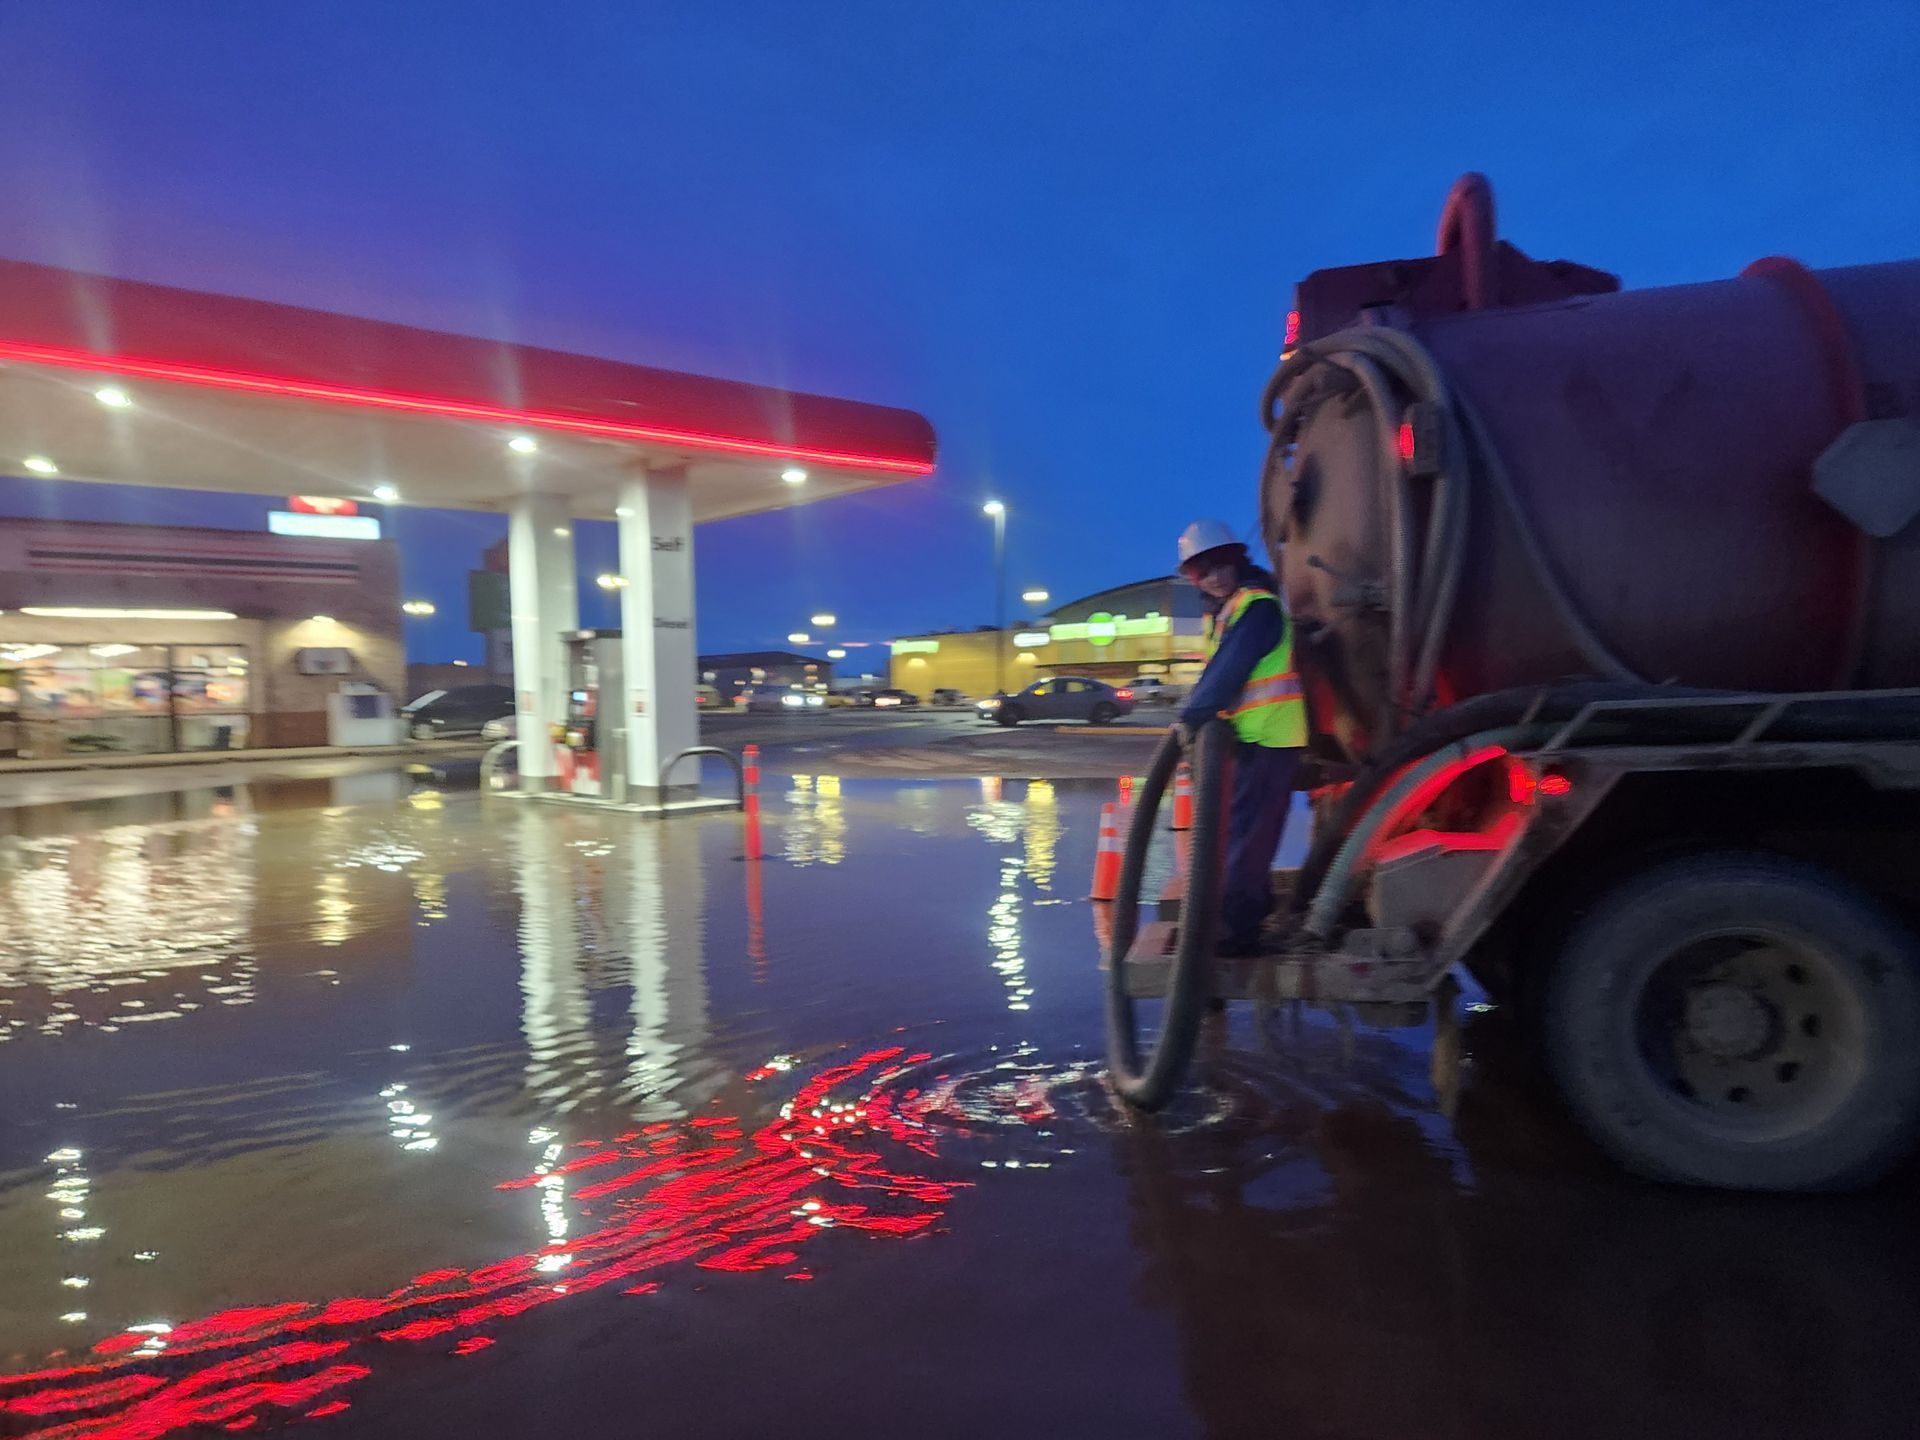 A man is pumping water from a truck at a flooded gas station